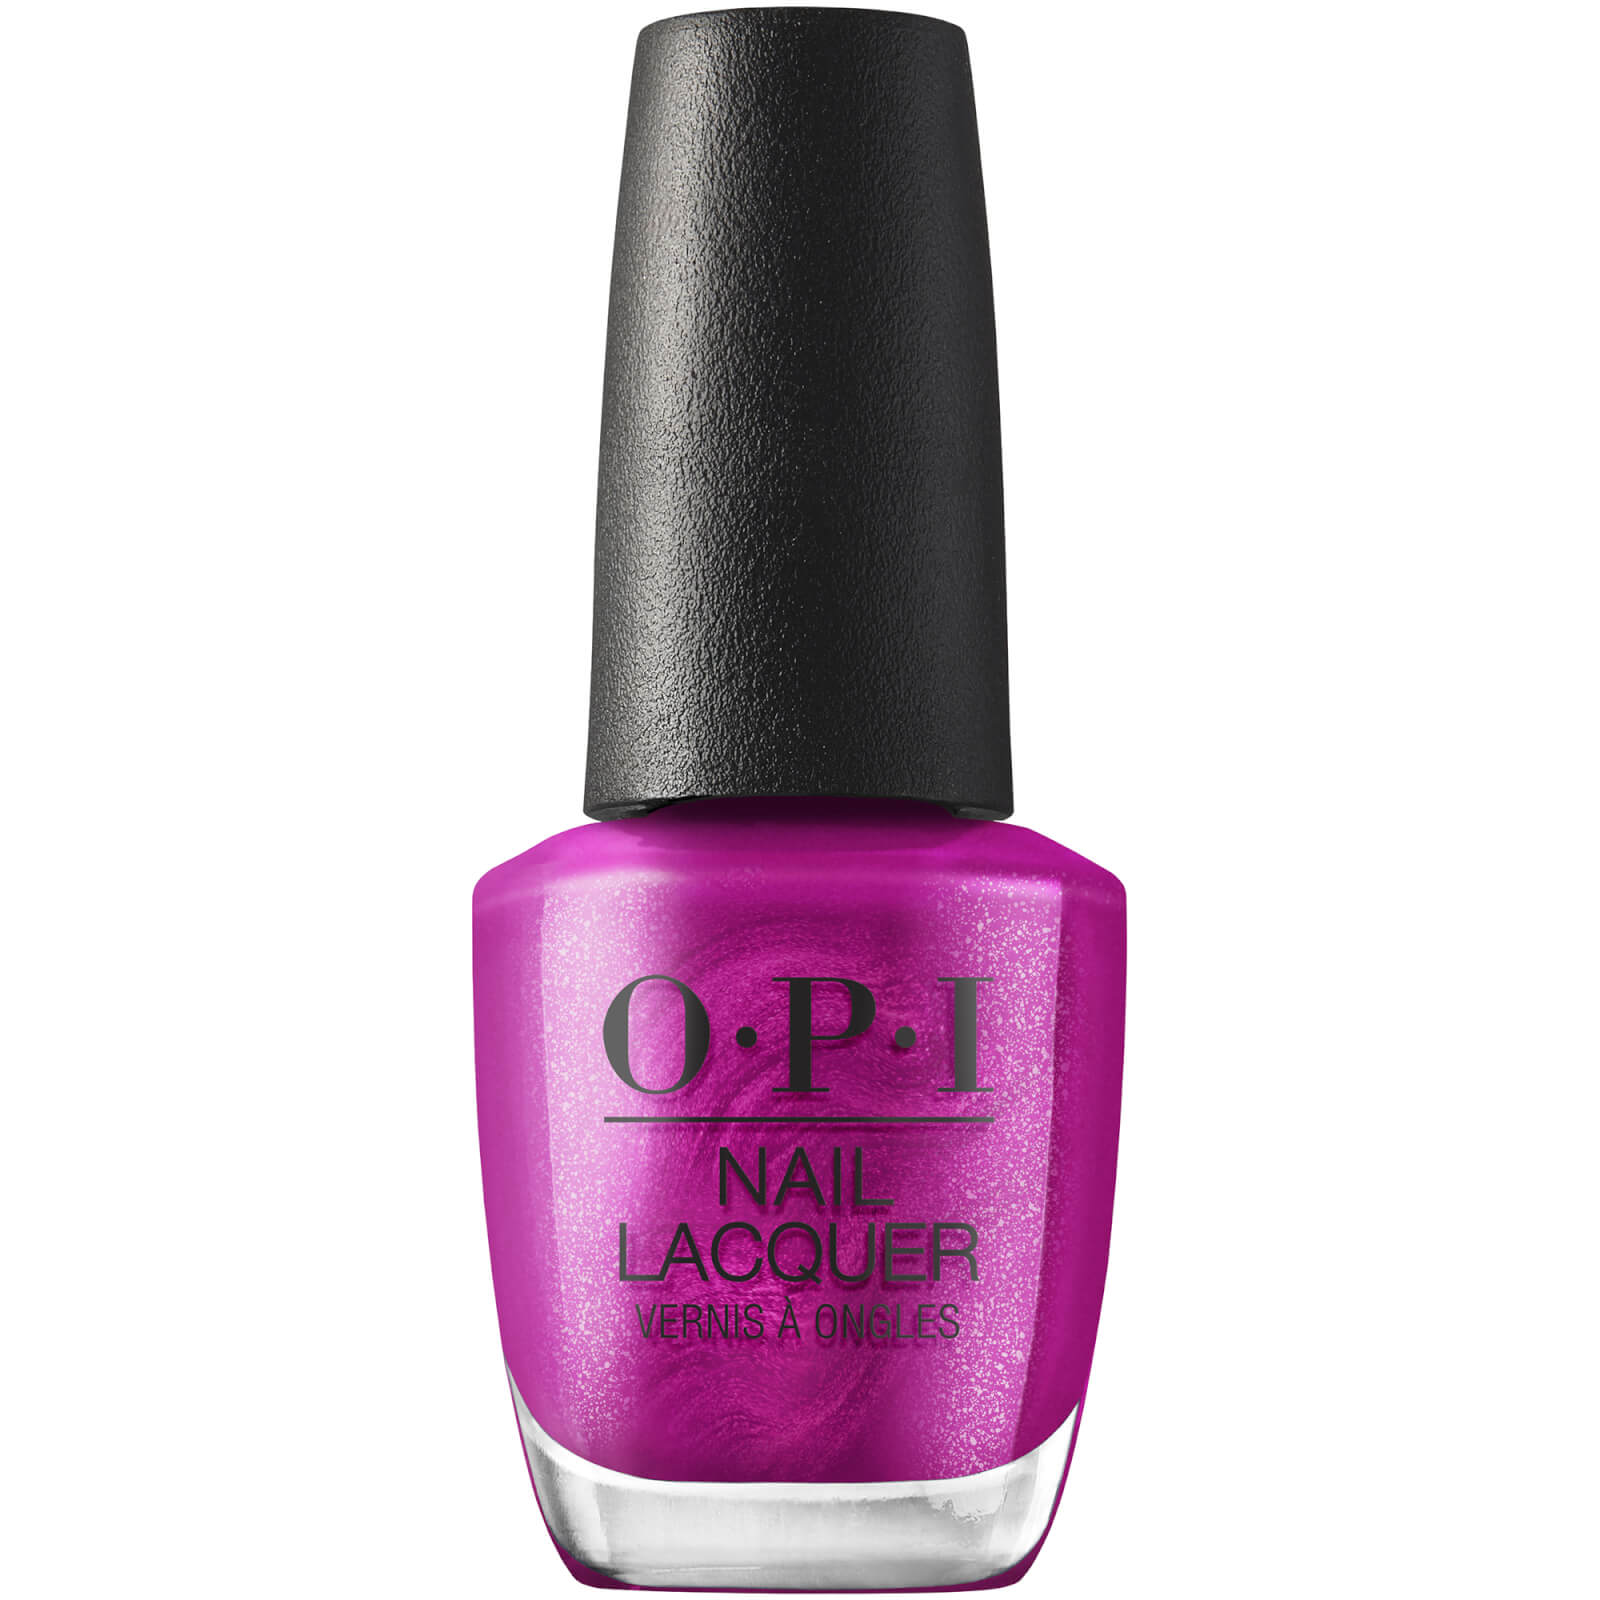 Opi Jewel Be Bold Collection Nail Lacquer 15ml (various Shades) - Charmed, I'm Sure